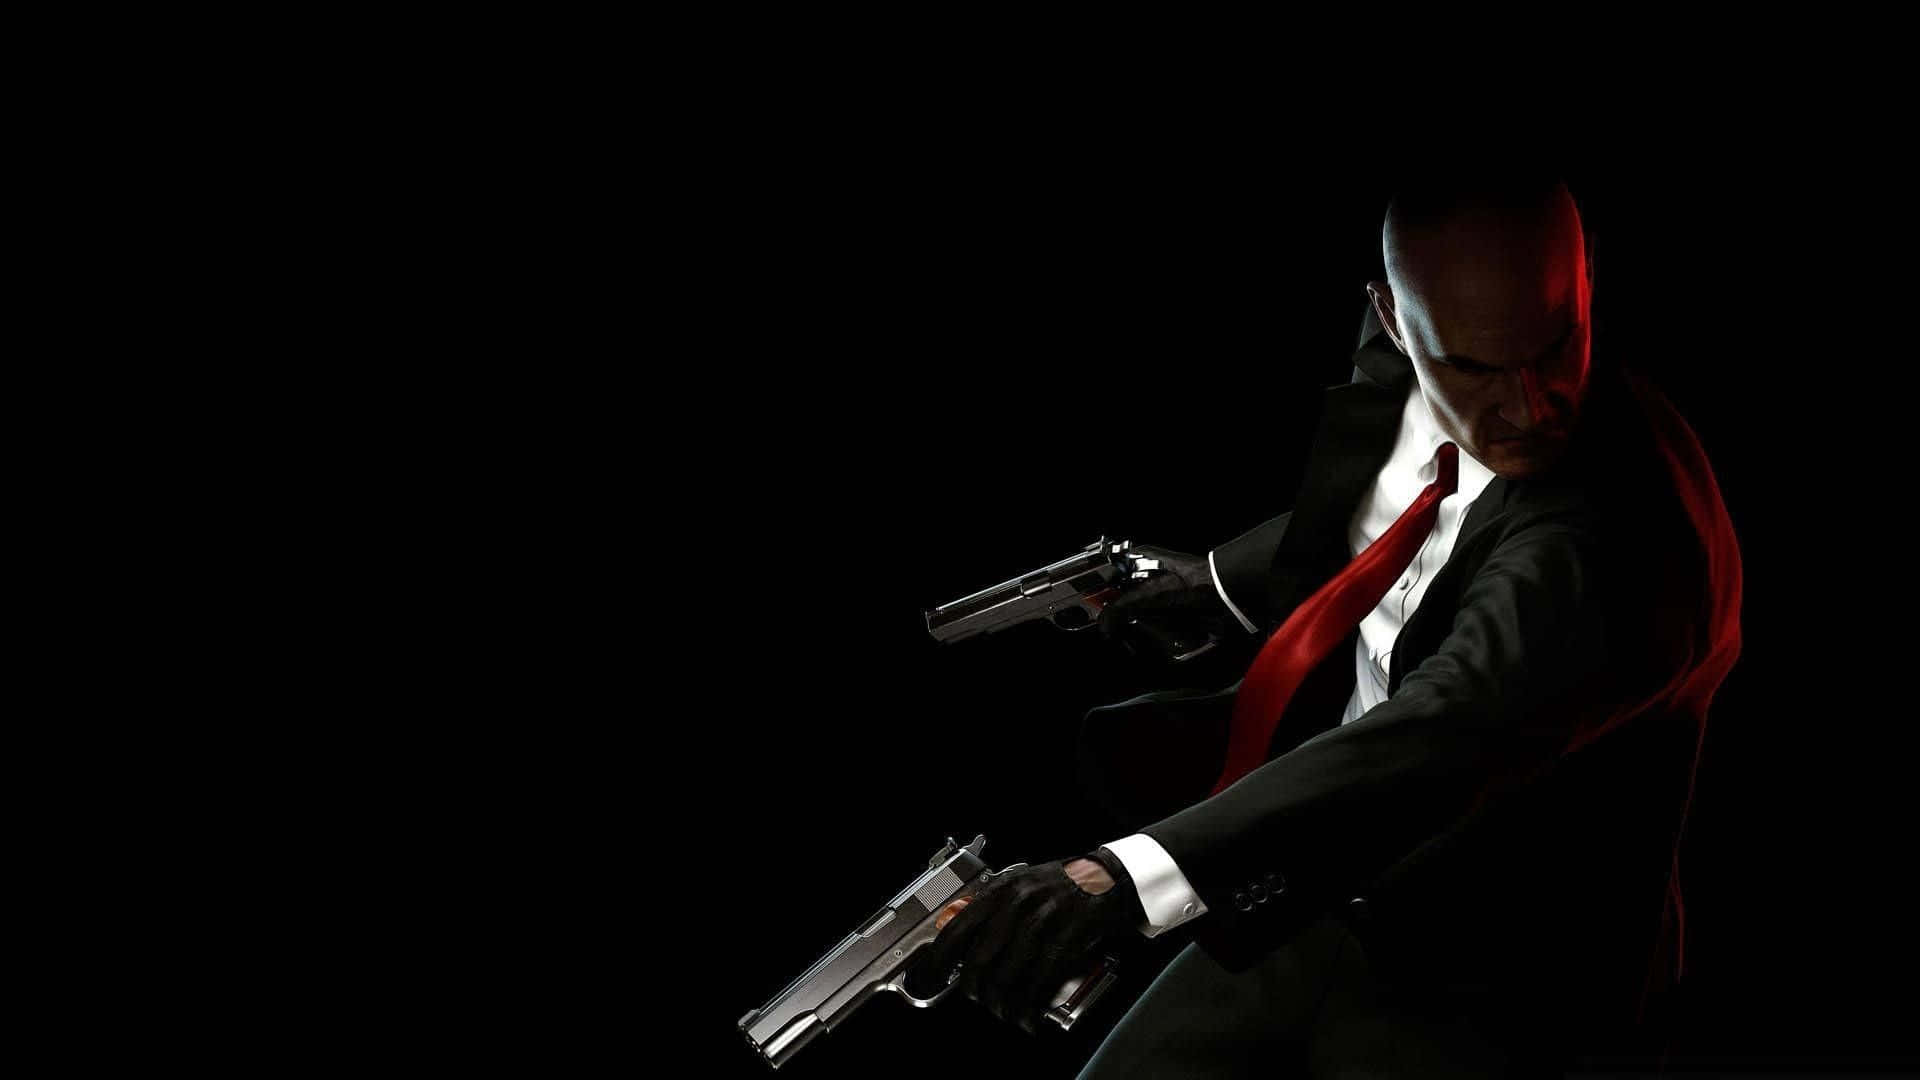 Agent 47 in Action in Hitman: Absolution